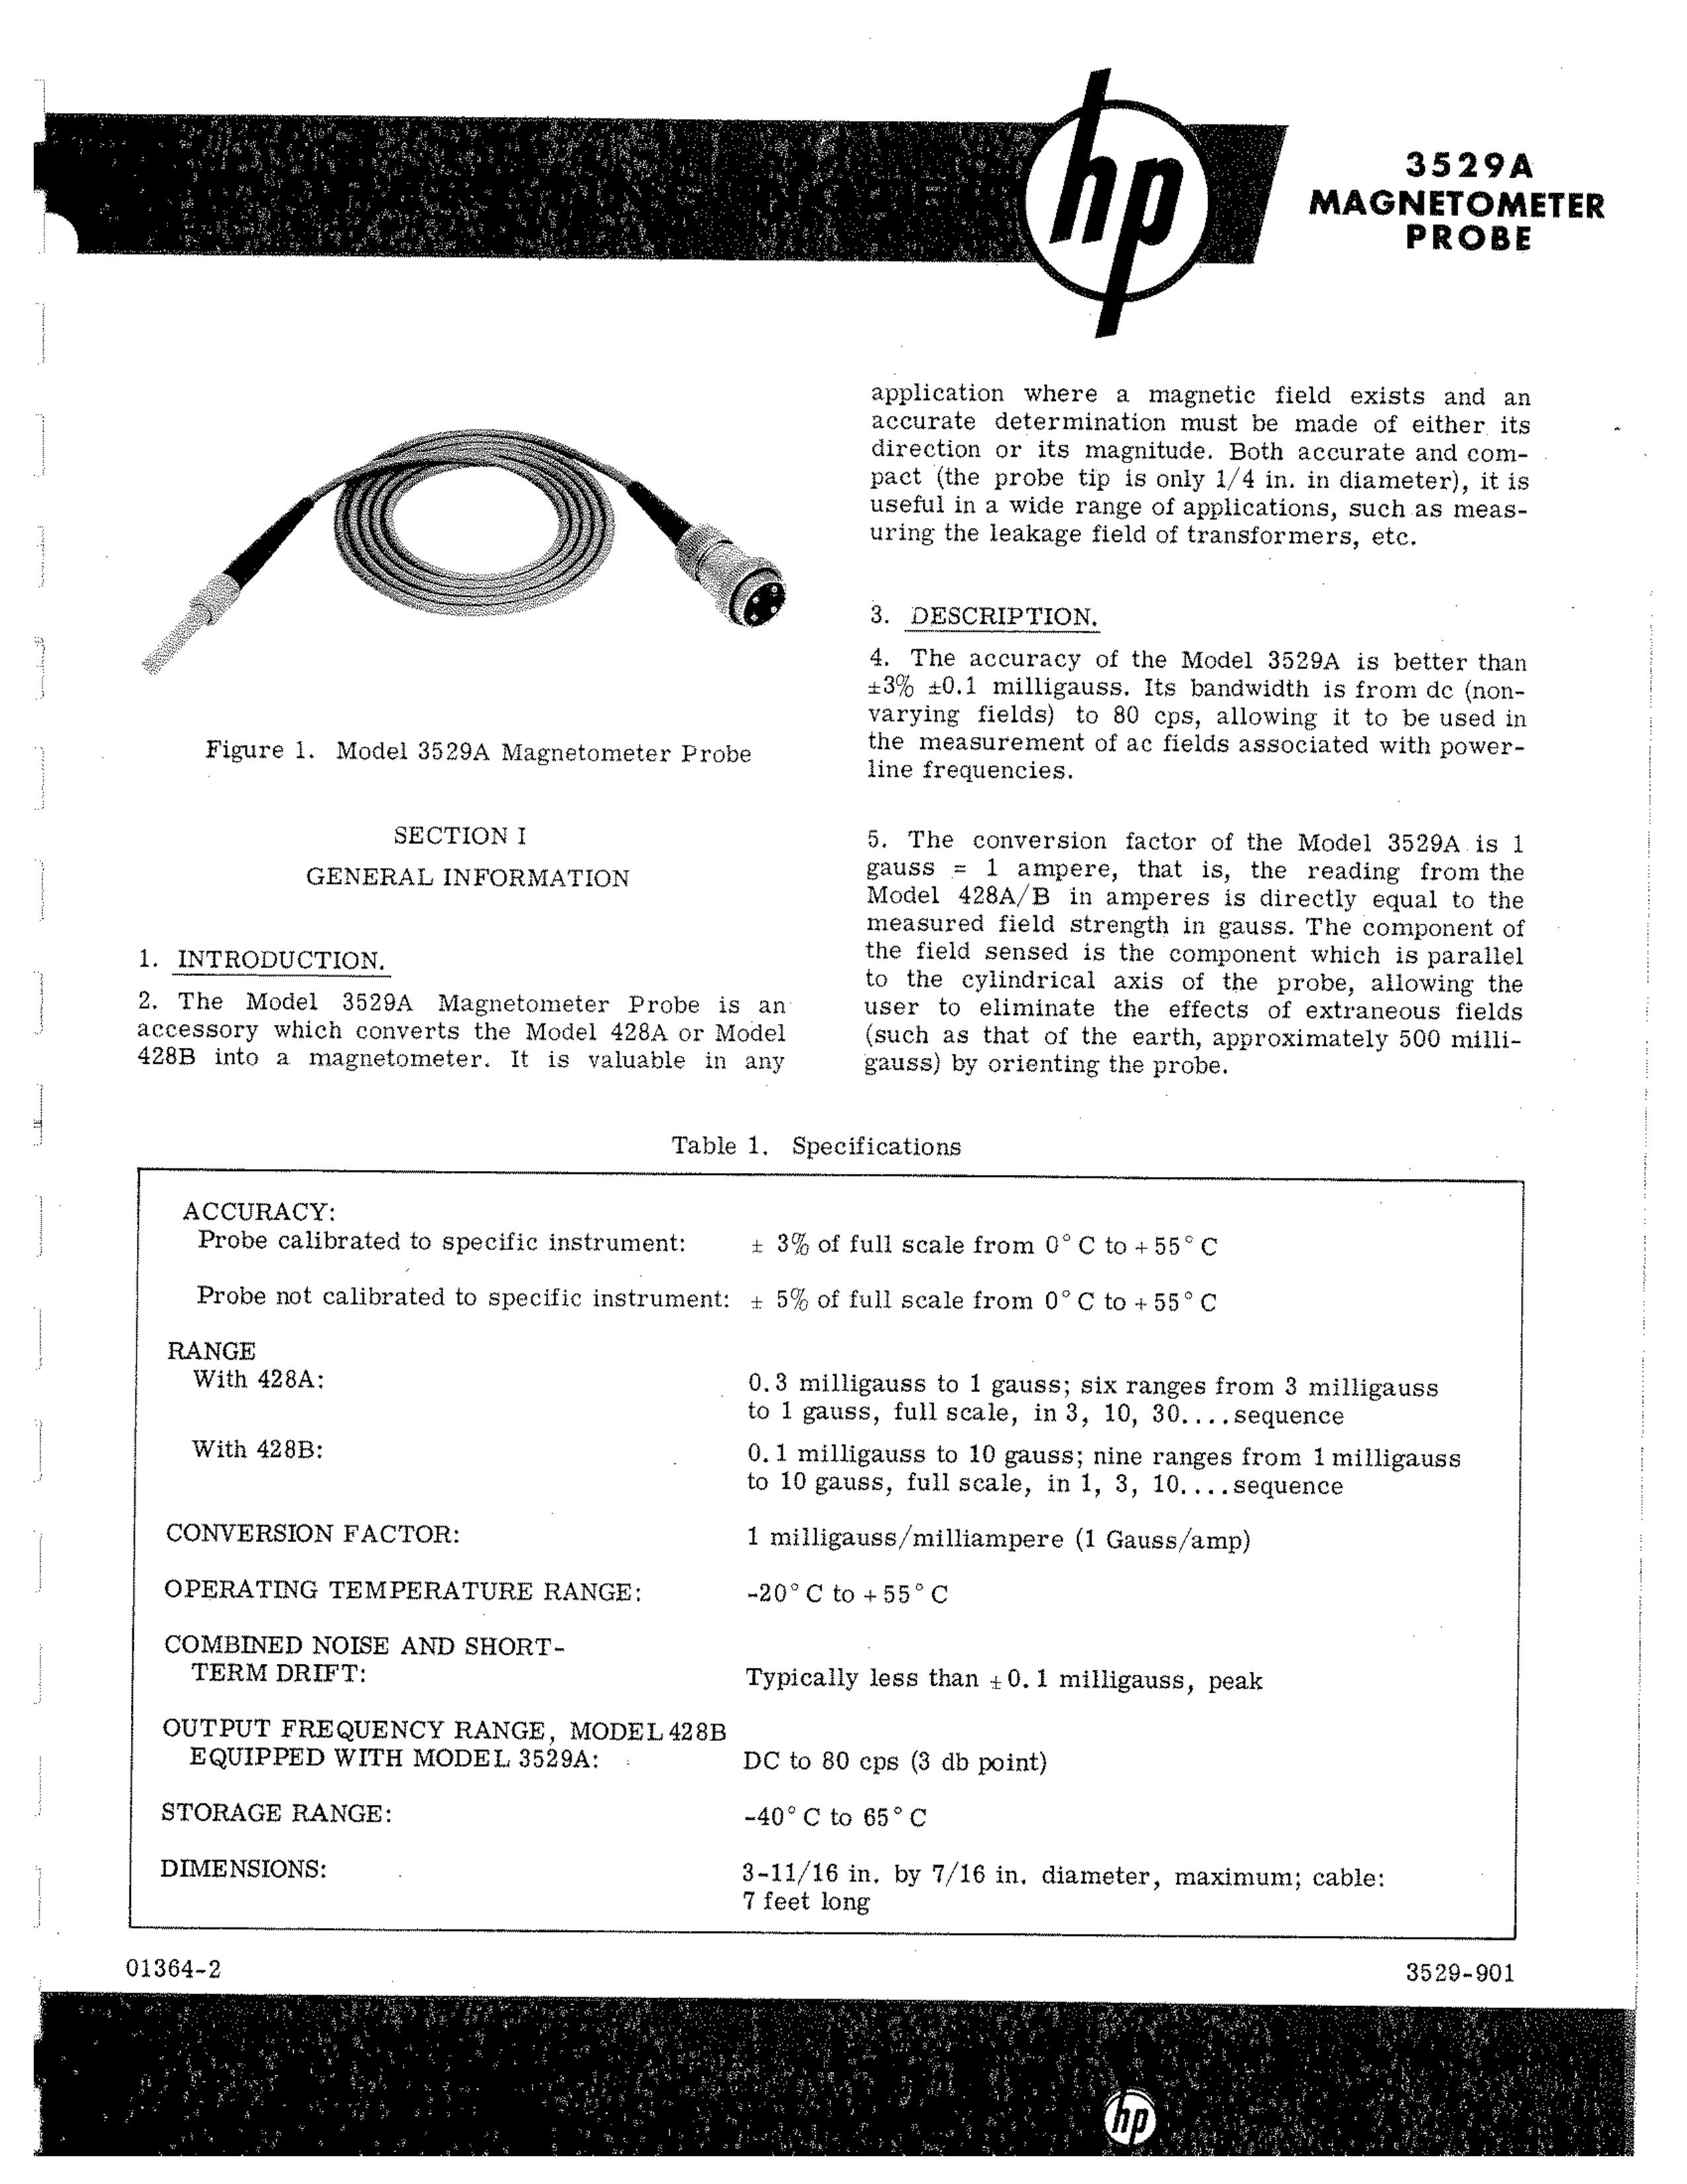 HP (Hewlett-Packard) 3529A Thermometer User Manual